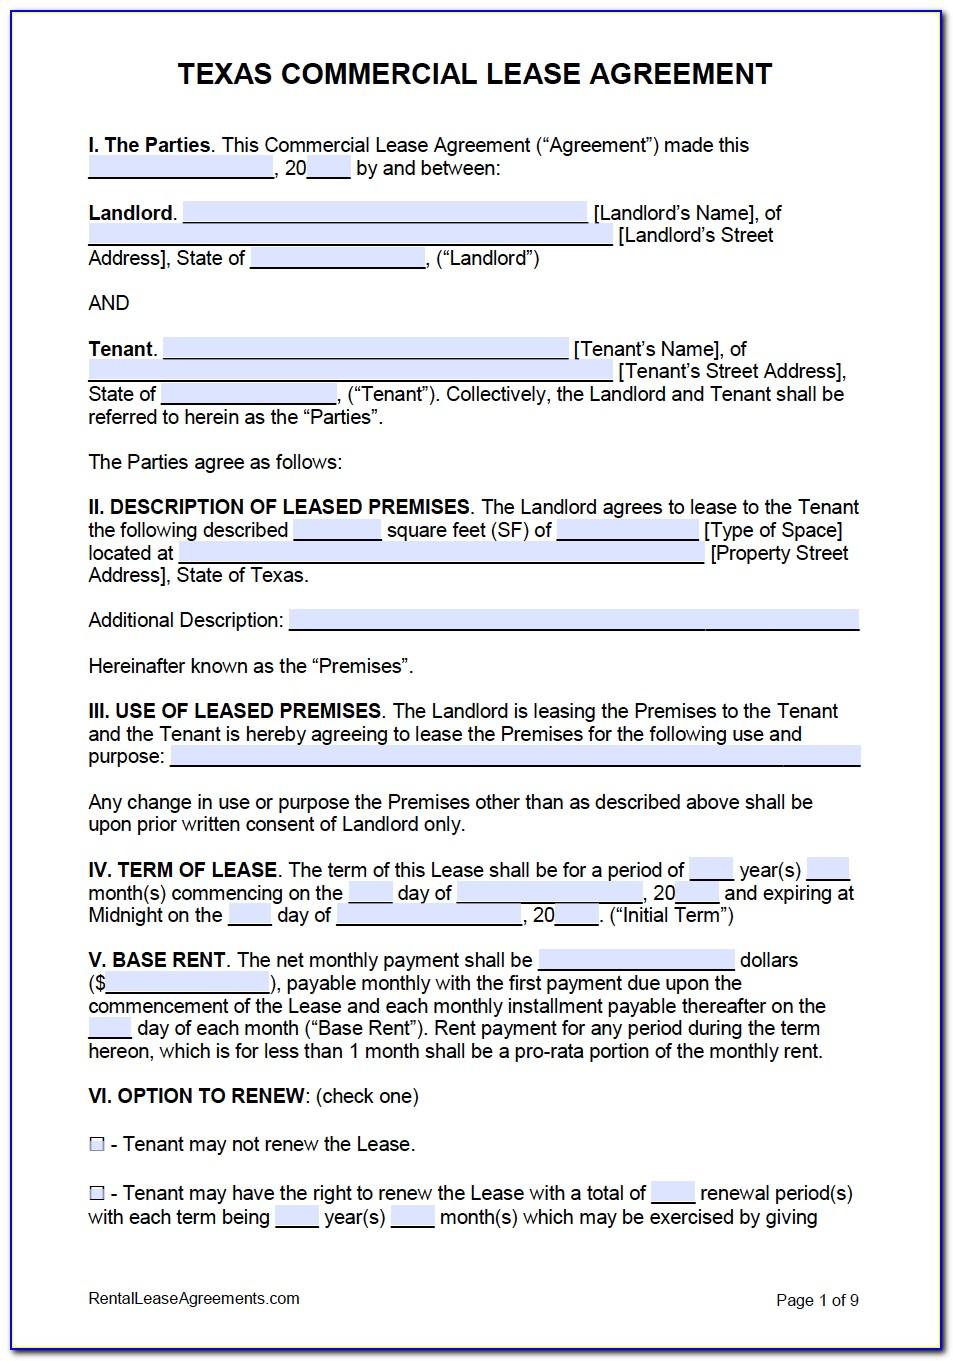 Texas Commercial Lease Agreement Form